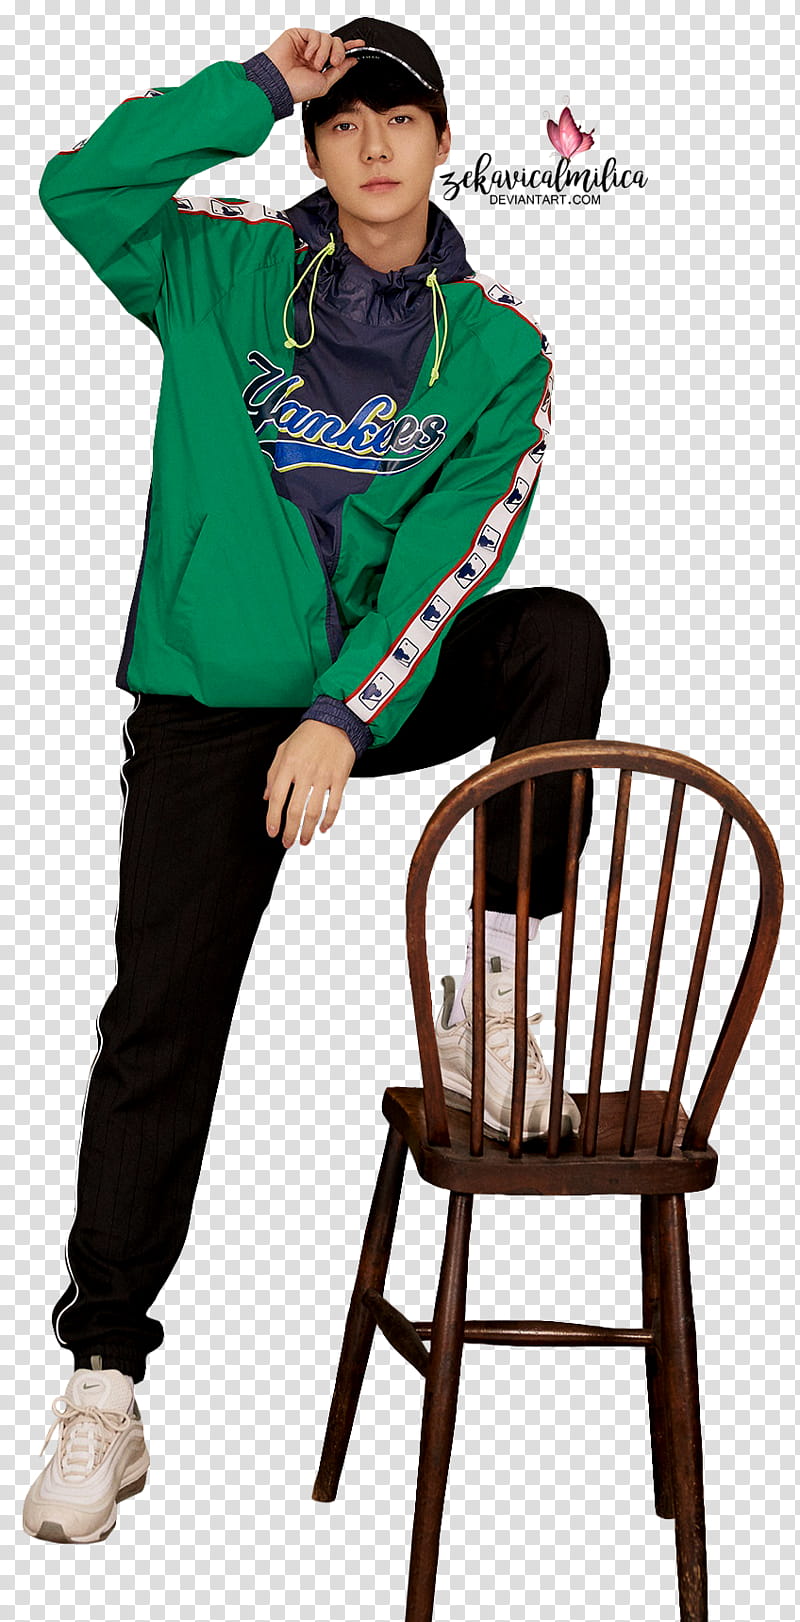 EXO Sehun MLB transparent background PNG clipart